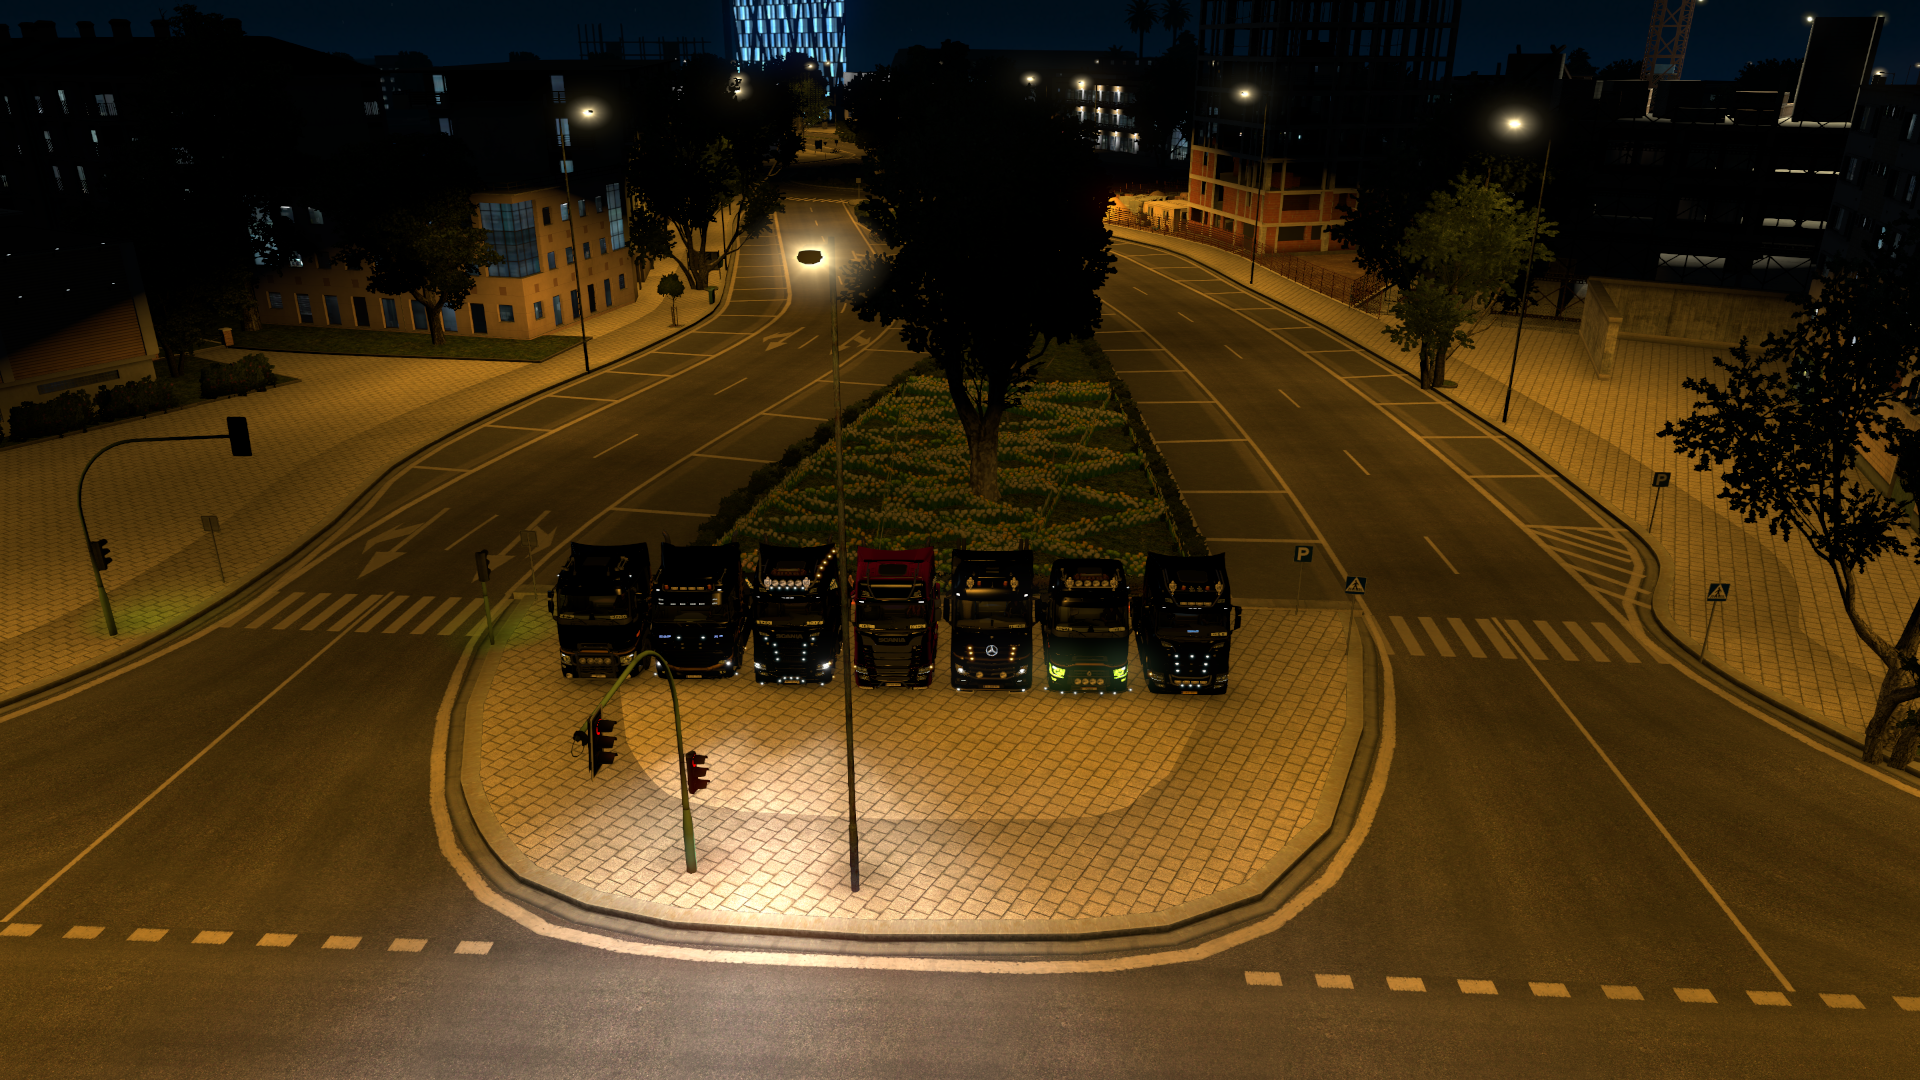 ets2_20210328_010250_00.png